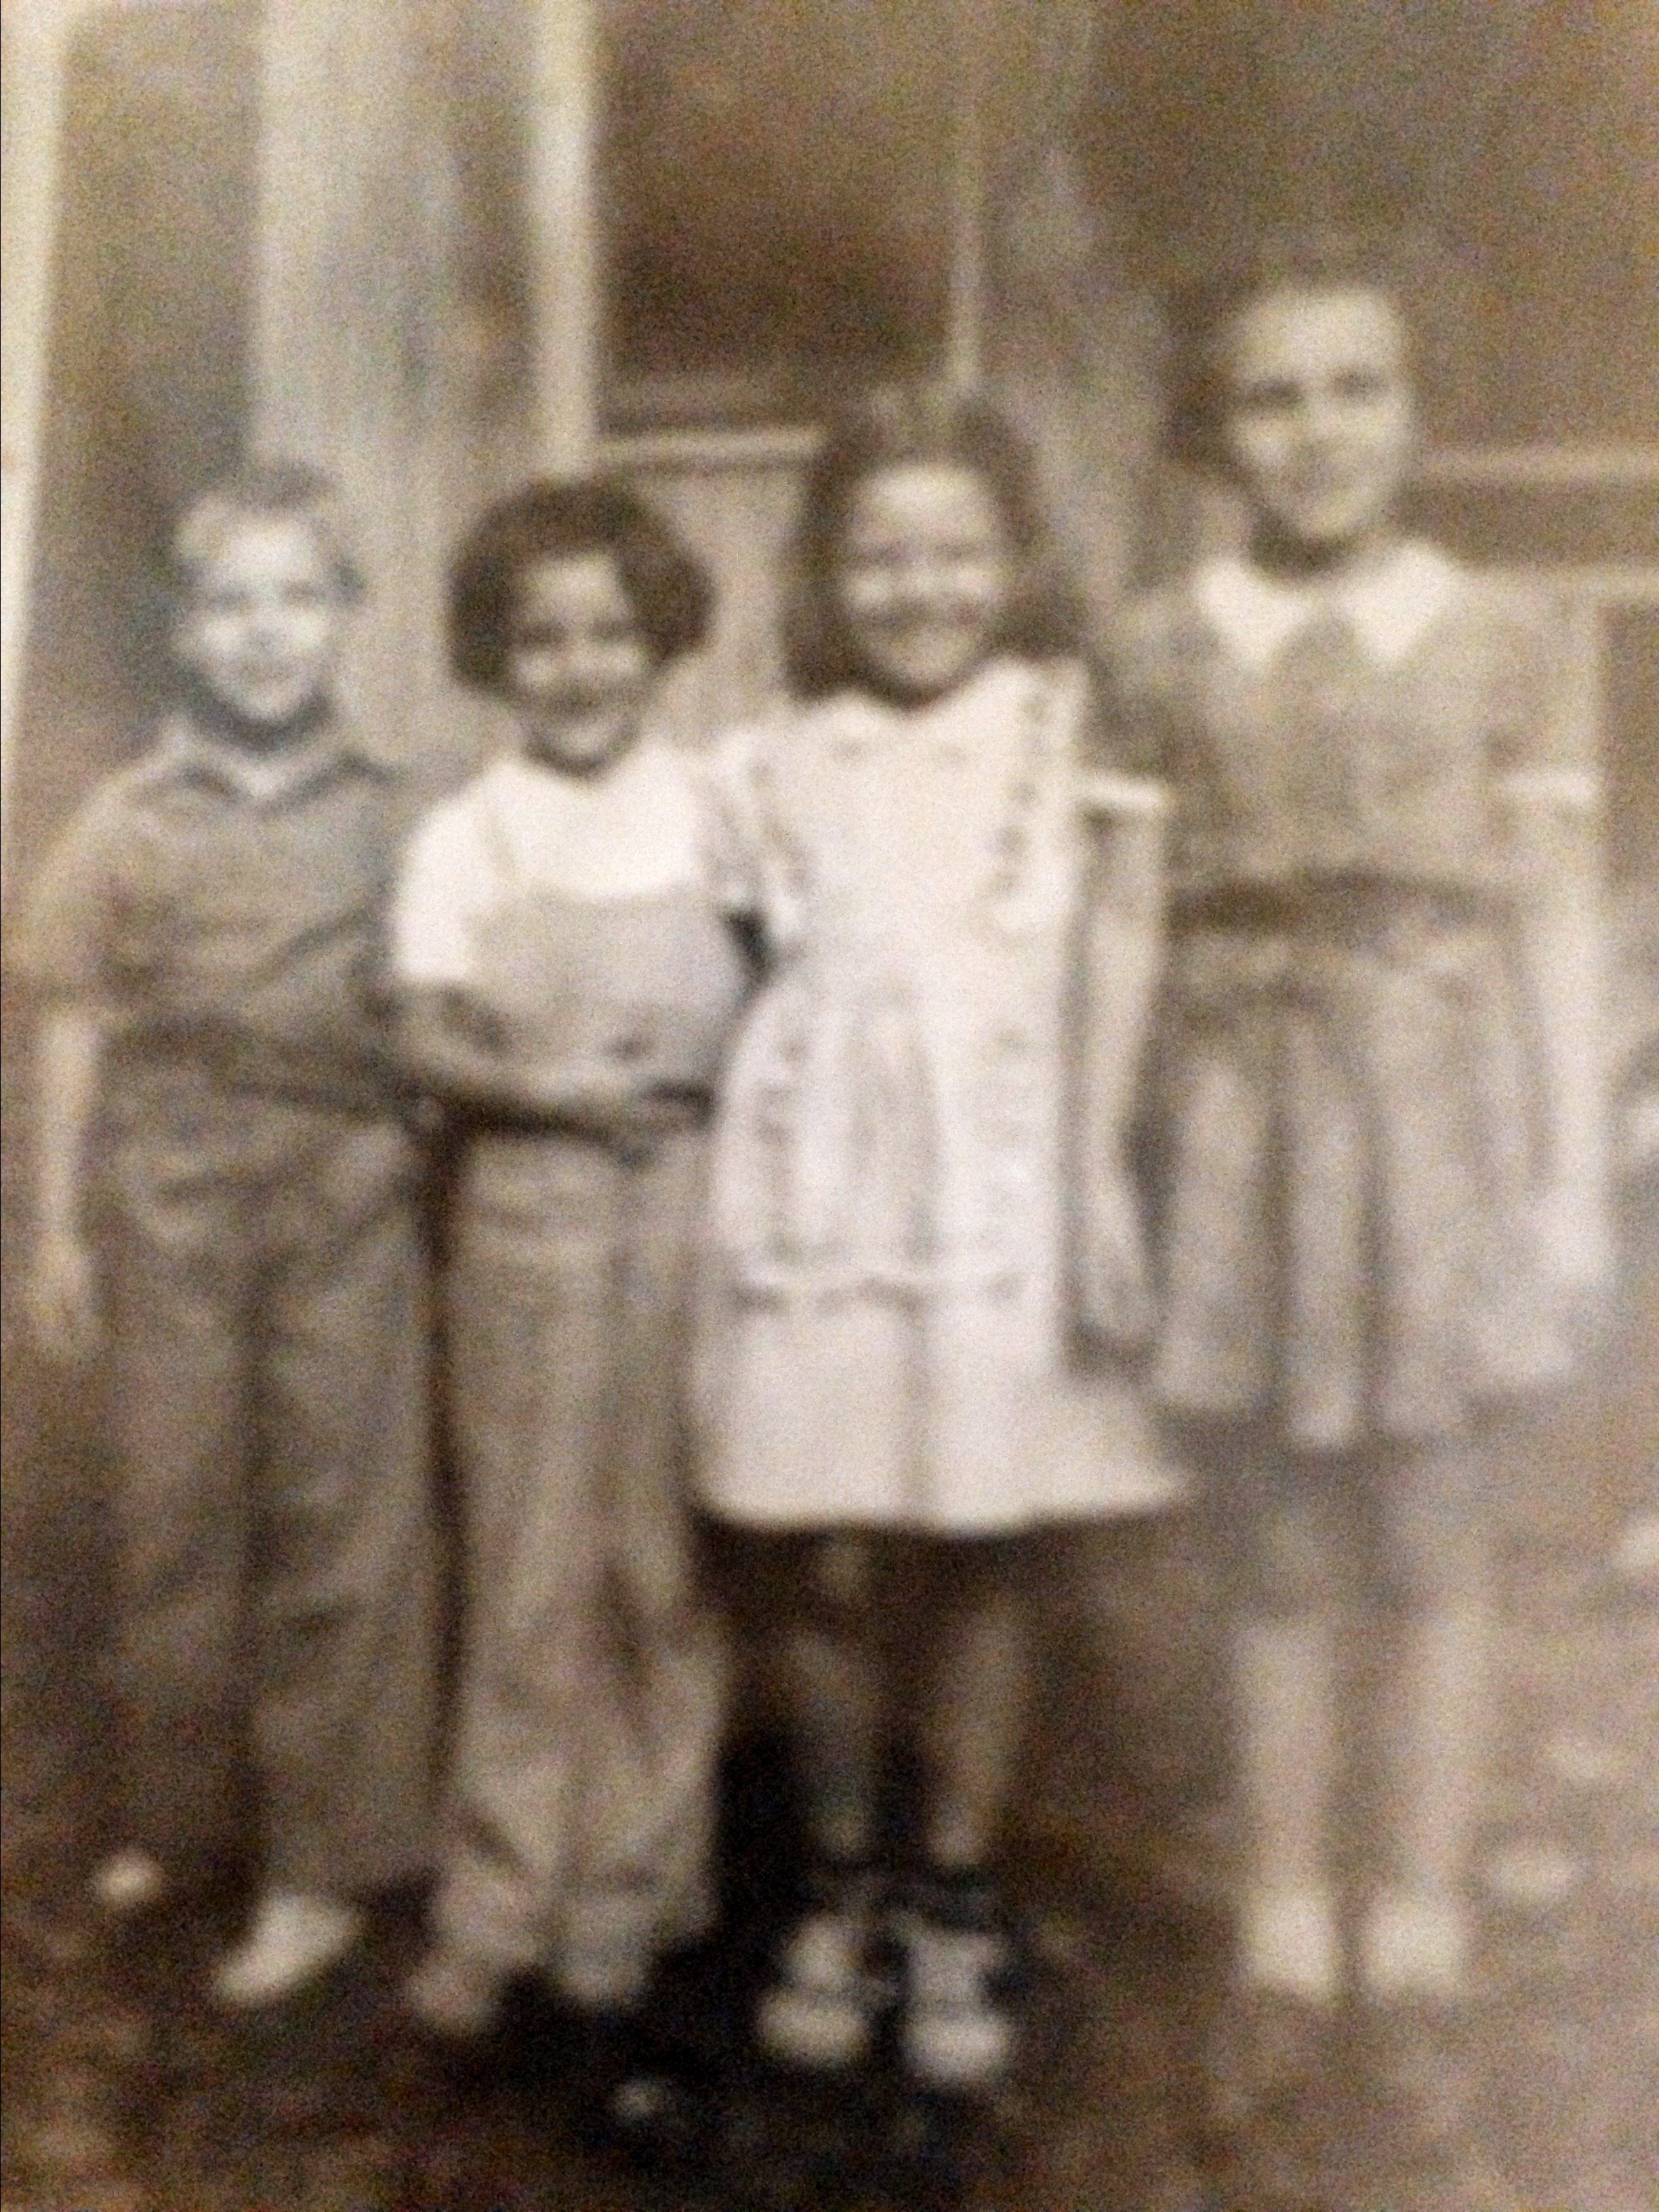 My sister & two cousins at our cabin in the woods 1944 